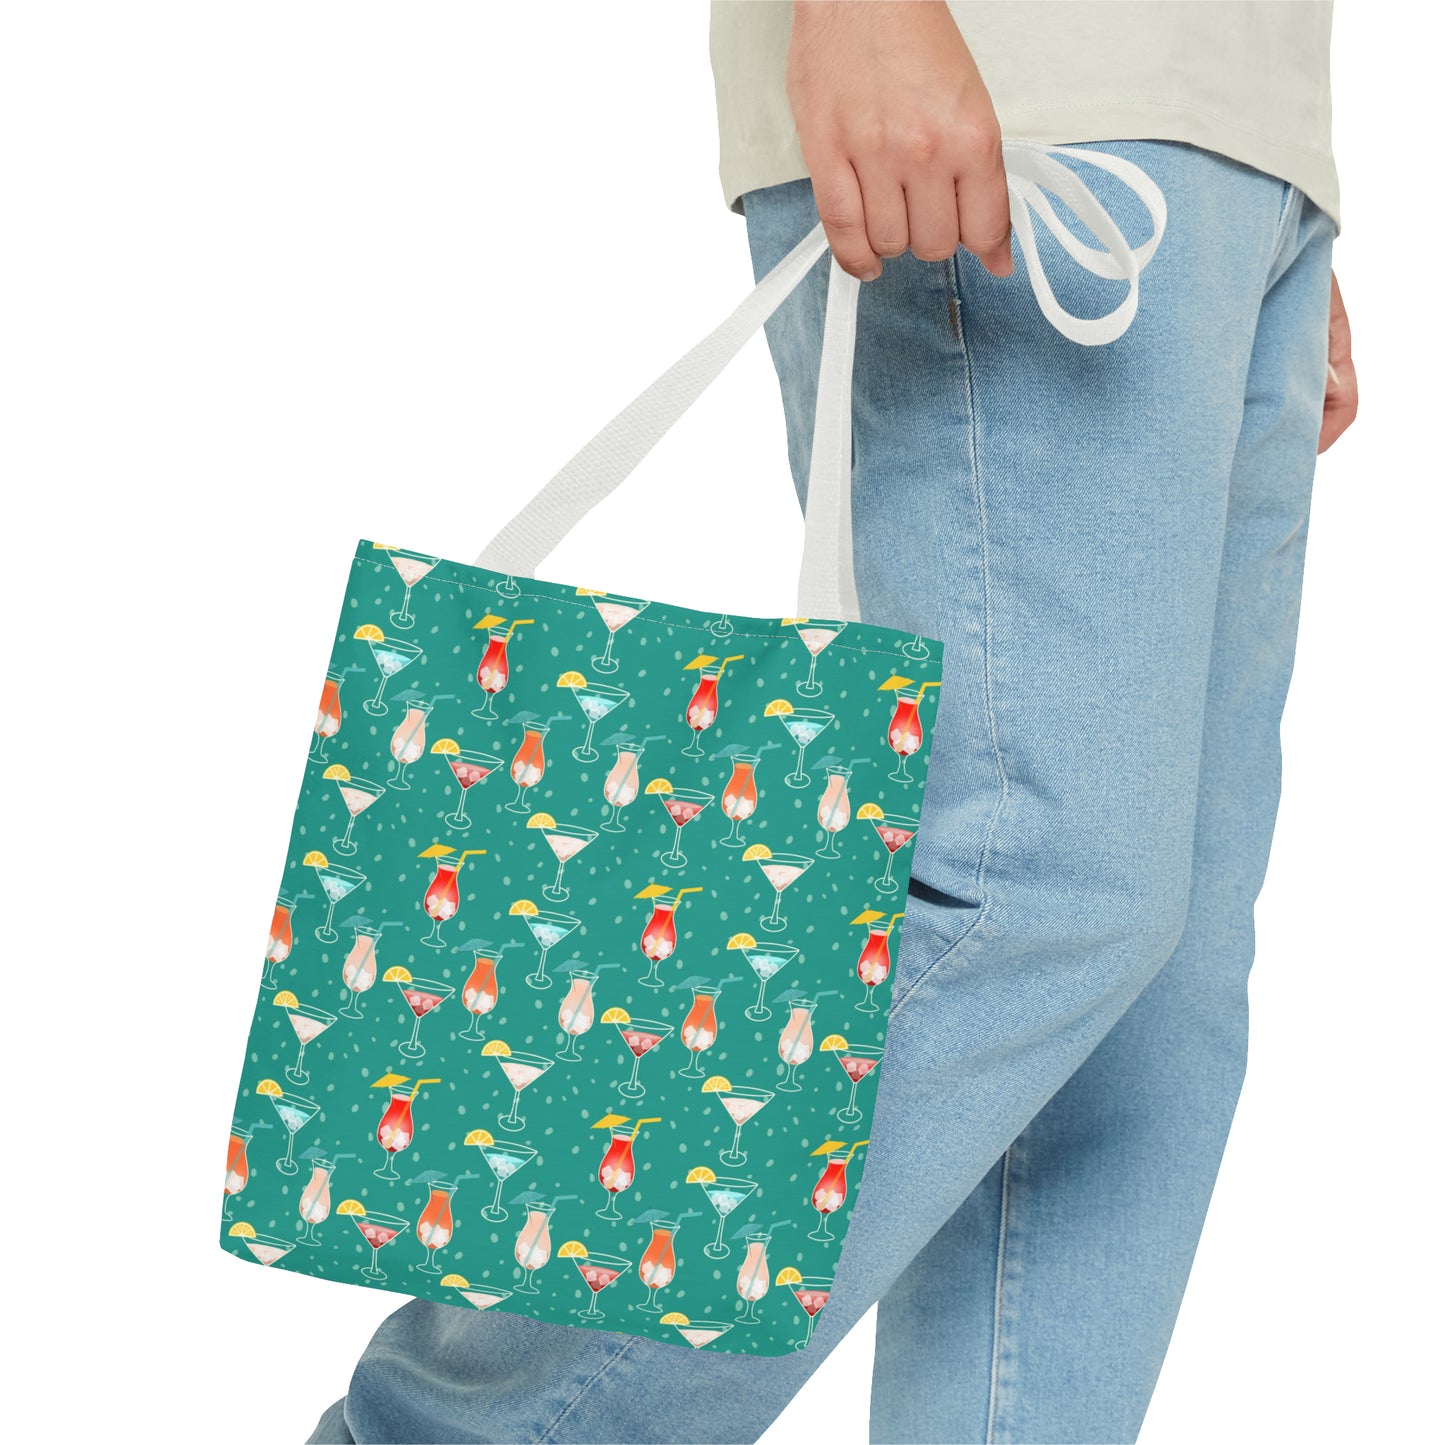 Cocktails Tote Bag: Vibrant Drinks with Lemon Slices, Umbrellas, and Straws on Turquoise Background